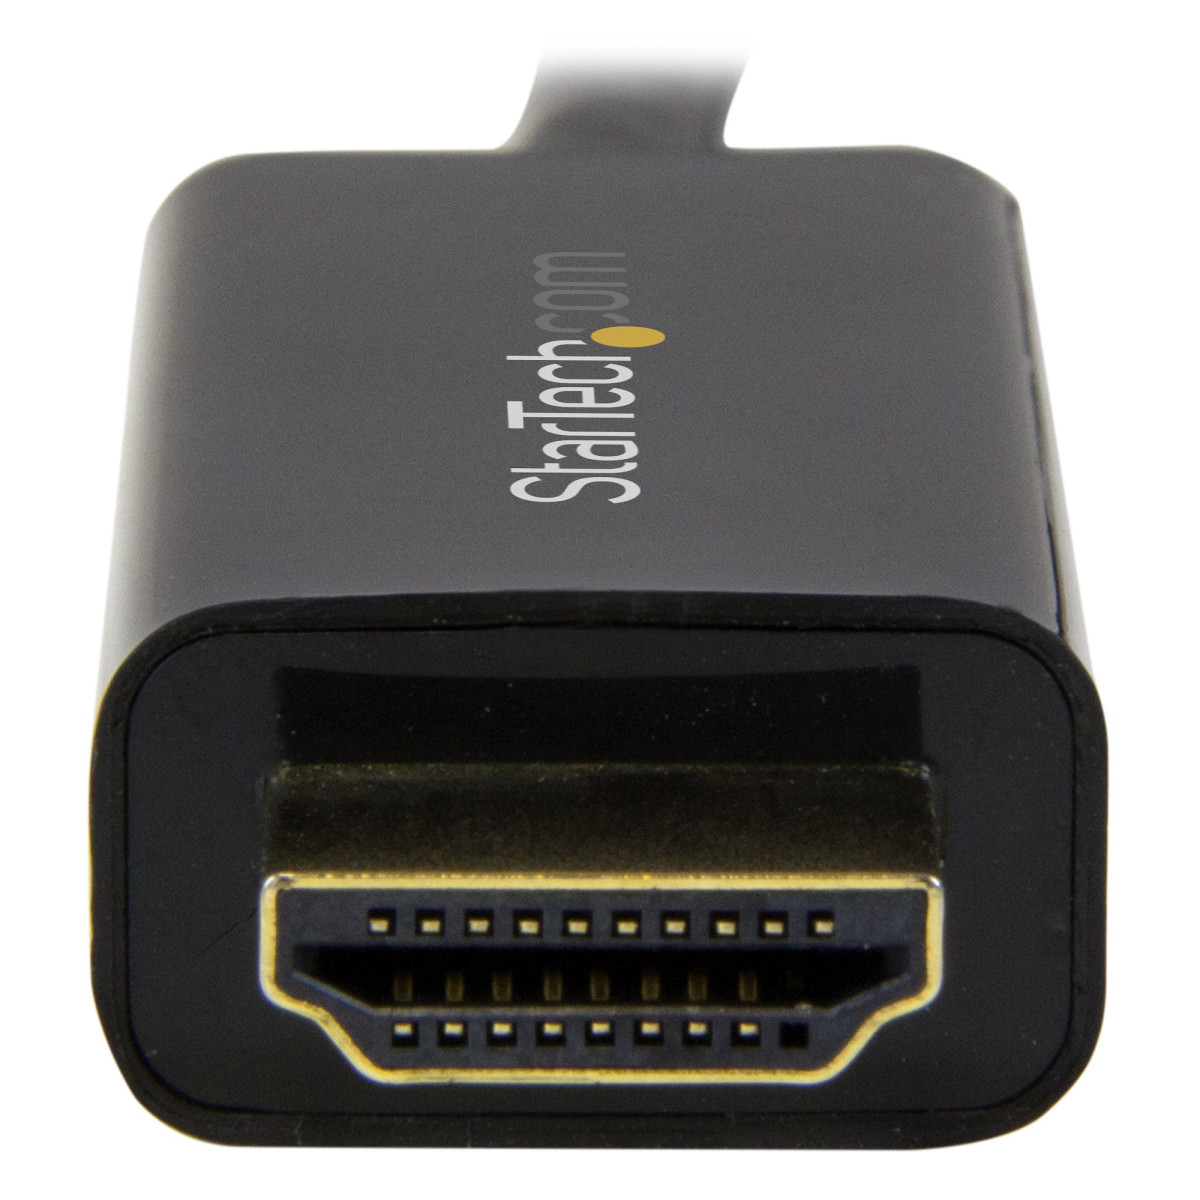 DisplayPort to HDMI converter cable